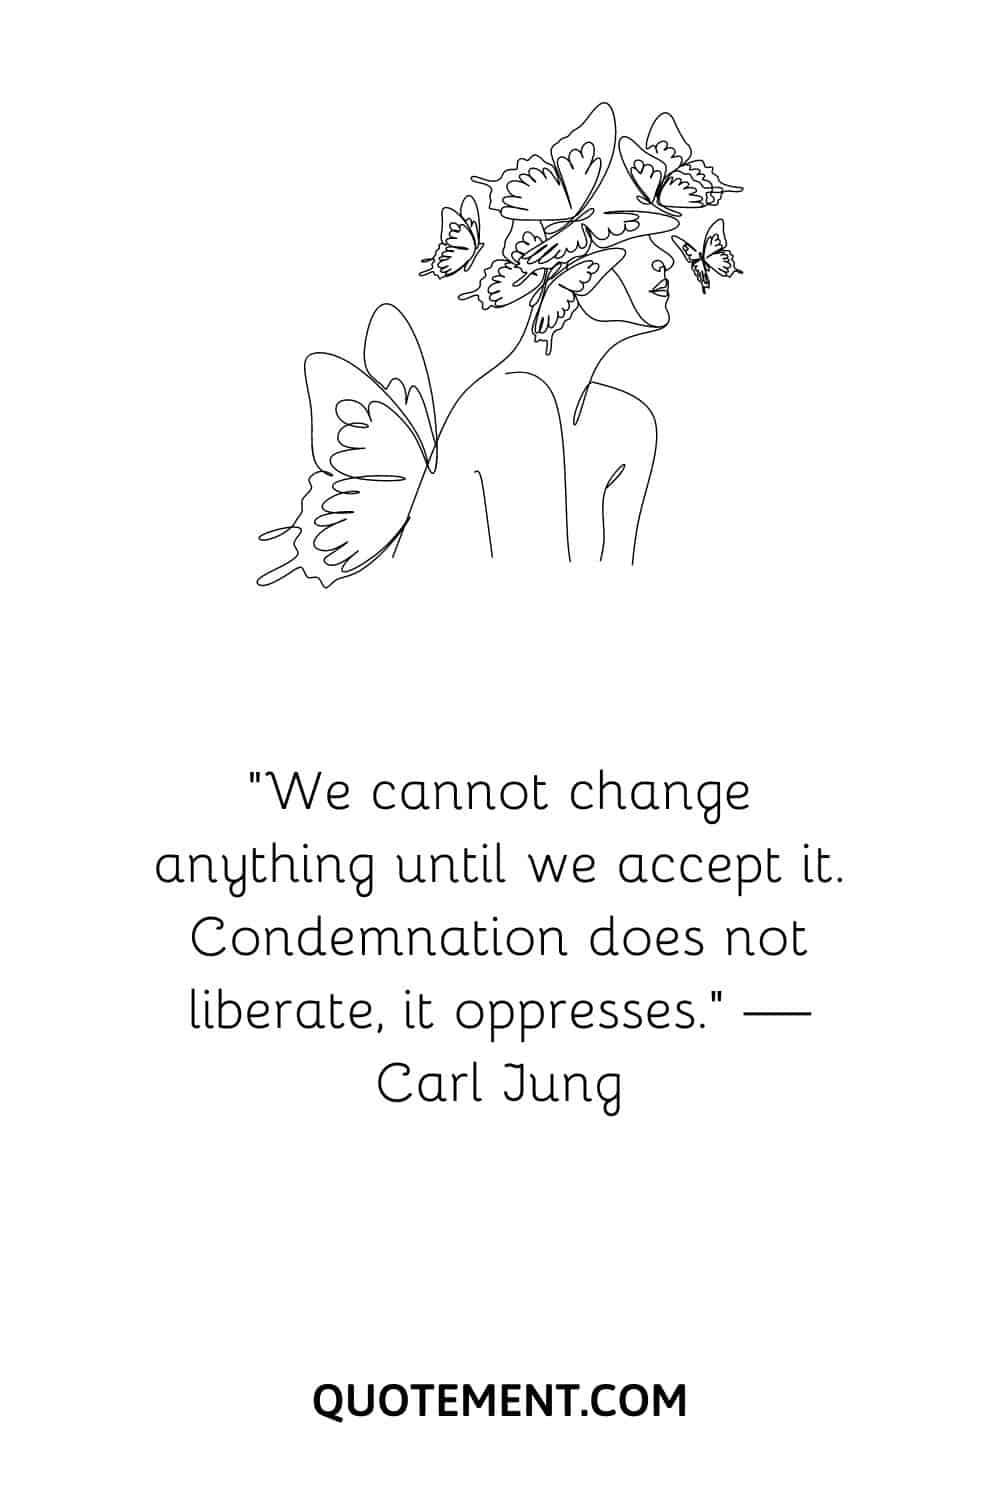 “We cannot change anything until we accept it. Condemnation does not liberate, it oppresses.” — Carl Jung